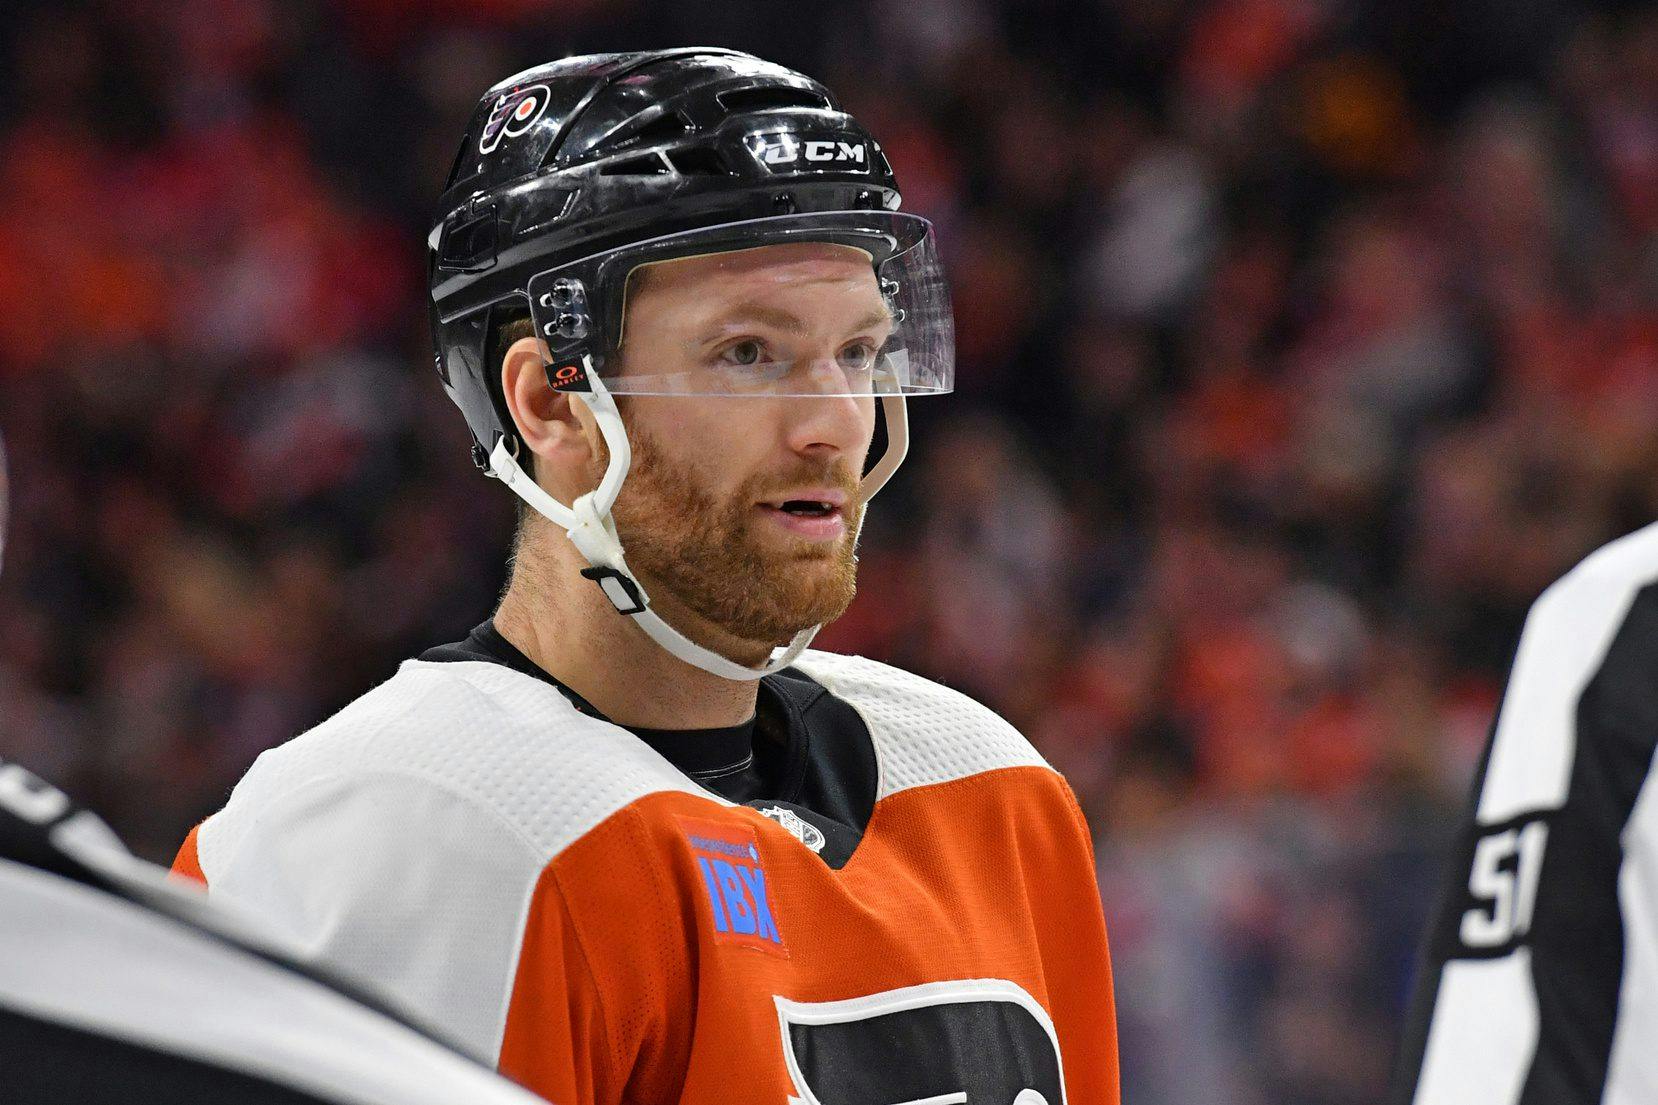 Flyers’ captain Sean Couturier expected to be a healthy scratch Tuesday vs. Maple Leafs